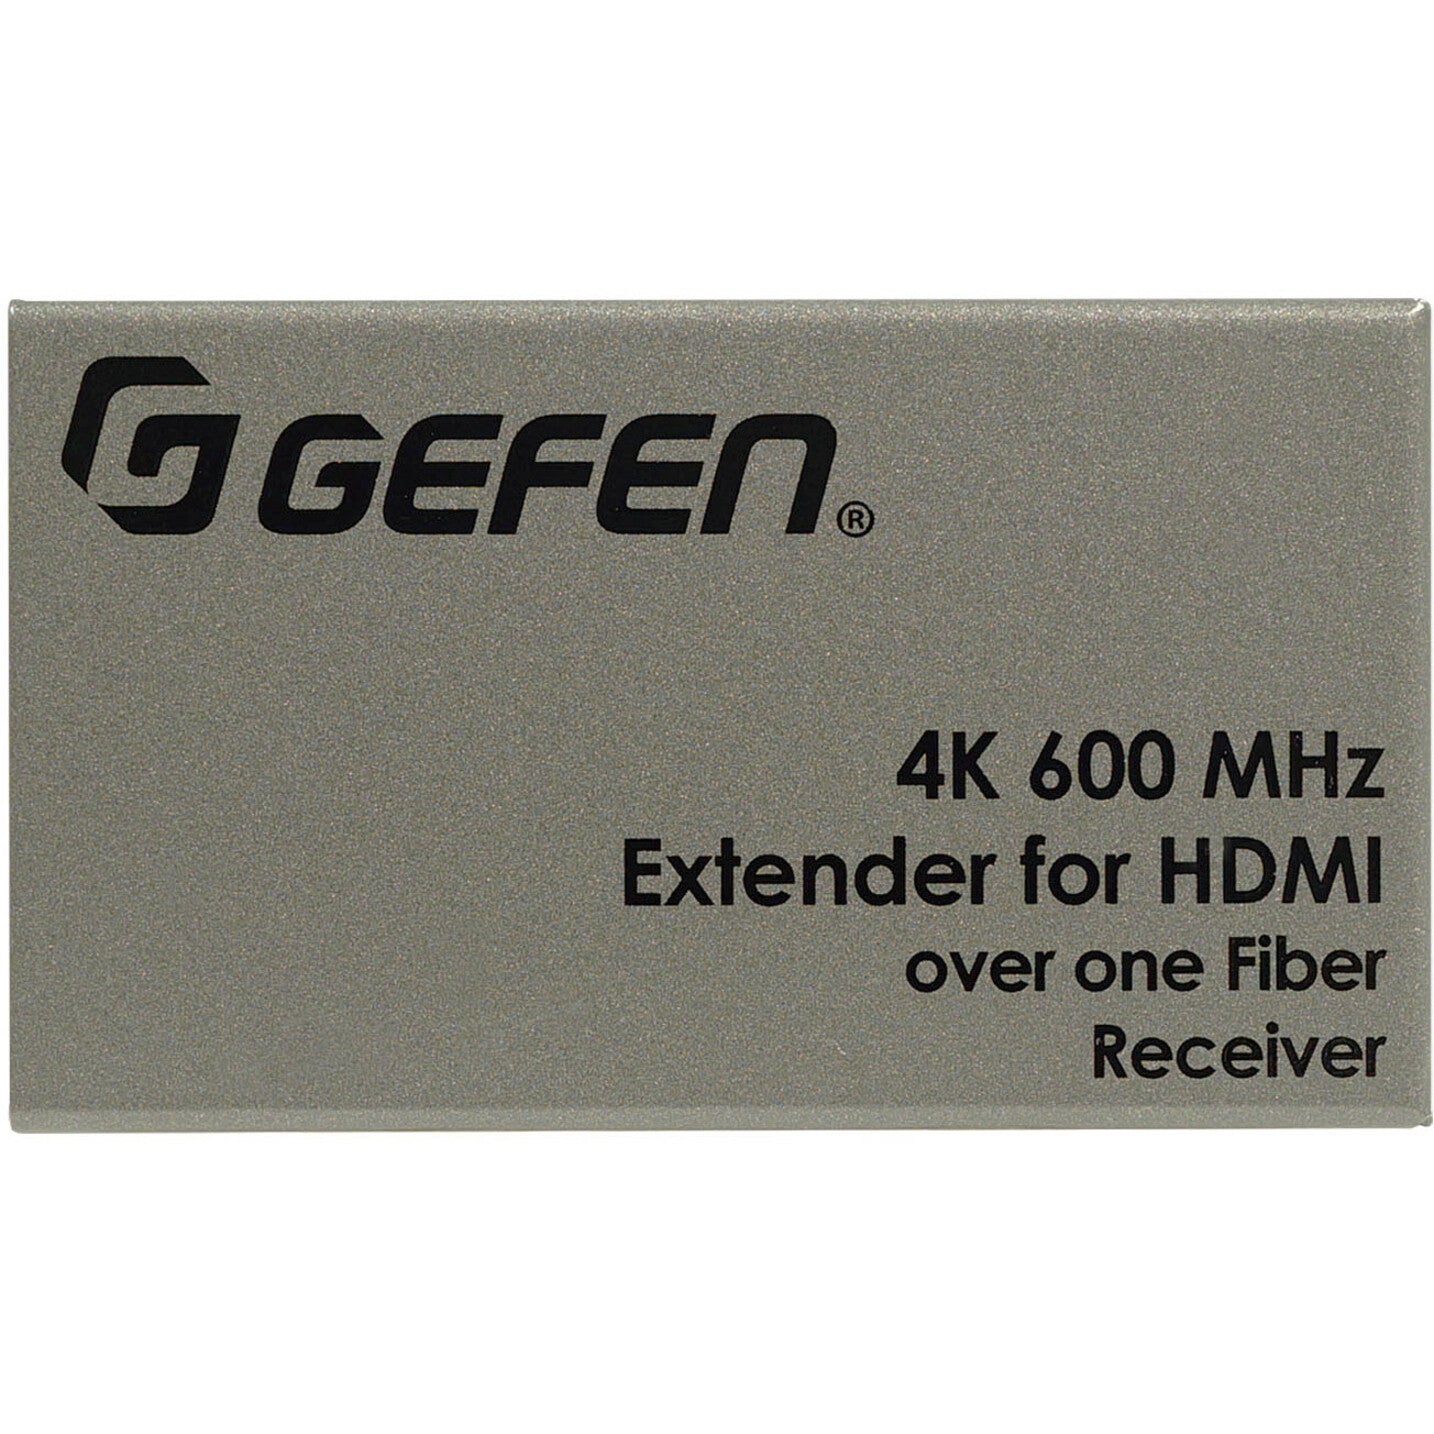 Gefen EXT-UHD600-1SC 4K Ultra HD 600 MHz Extender For HDMI Over One Fiber-Optic Cable, Uncompressed Audio/Video, HDR, 660ft Range